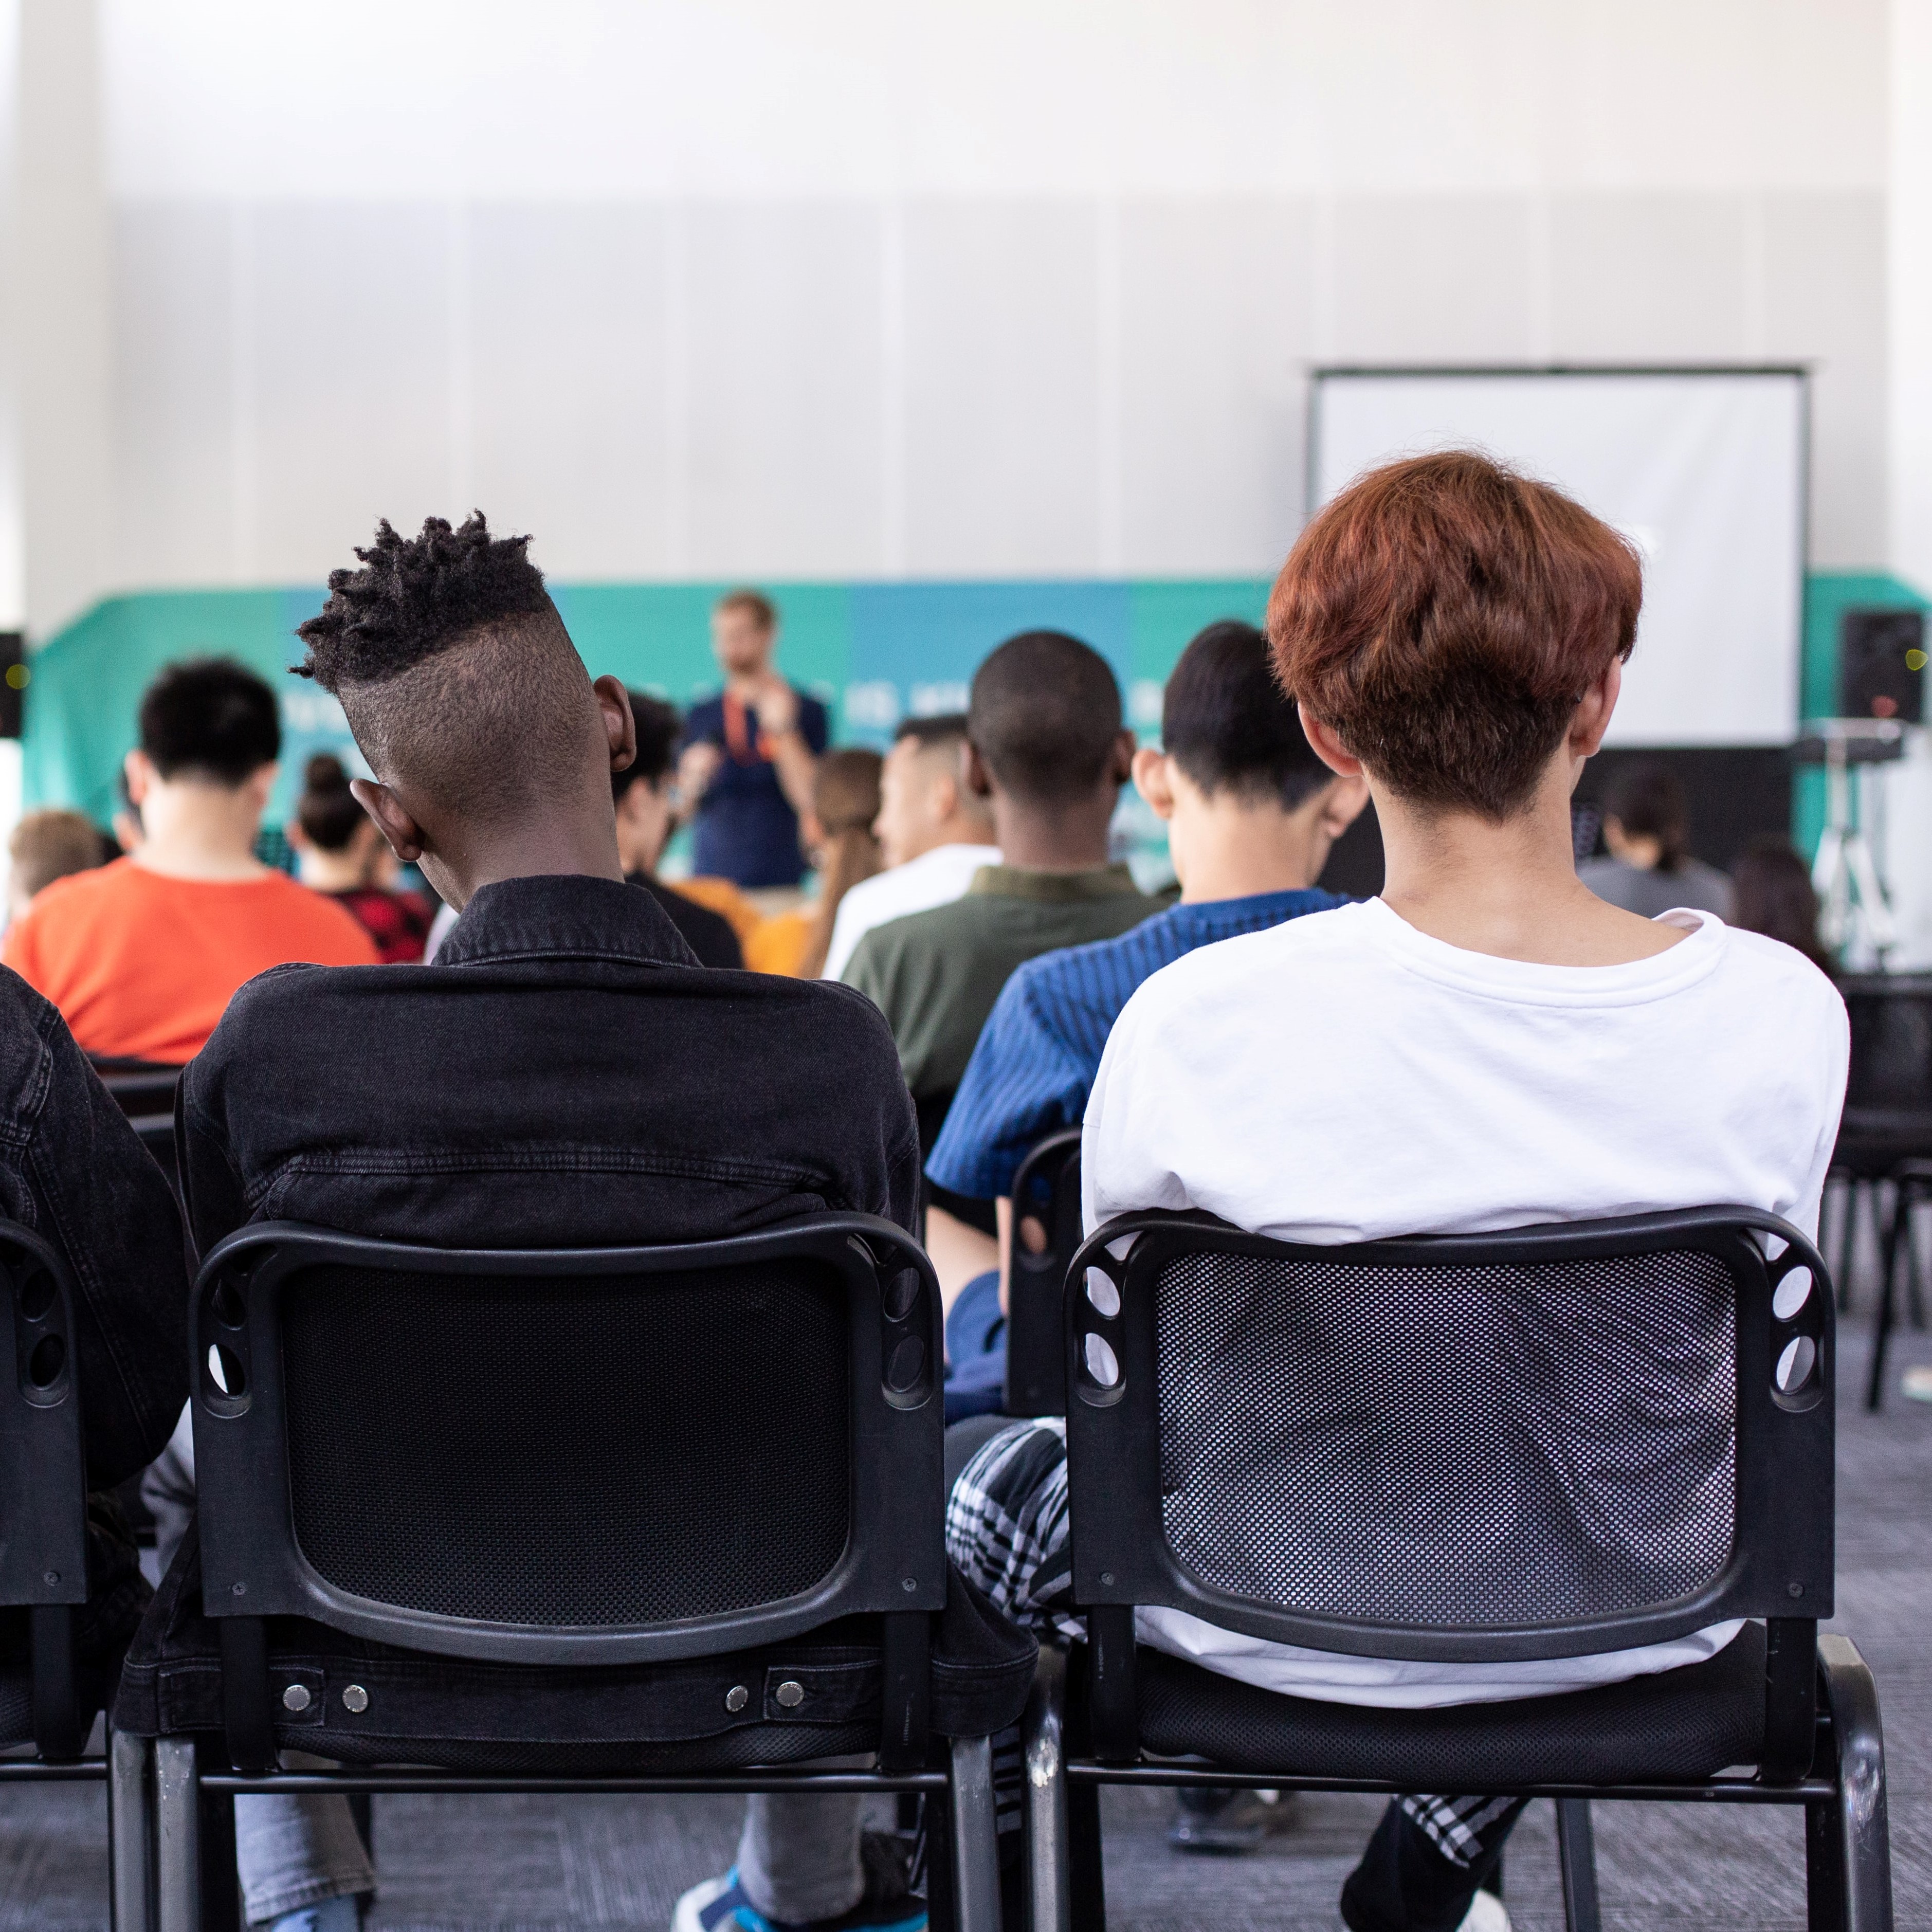 A photo of young people sitting in chairs facing away from the camera and towards a speaker at a whiteboard.